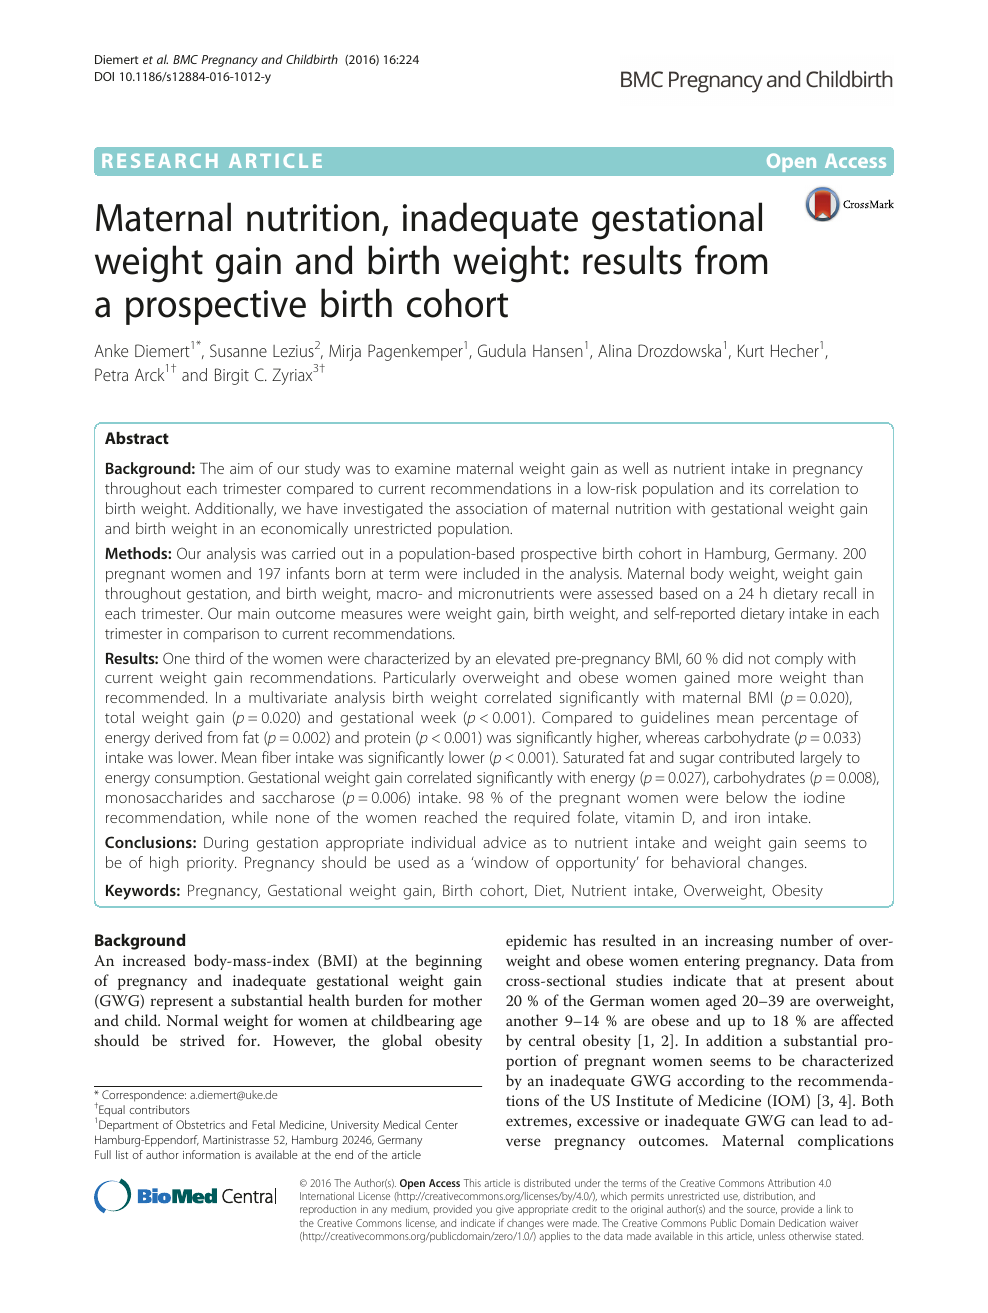 Maternal Nutrition Inadequate Gestational Weight Gain And Birth